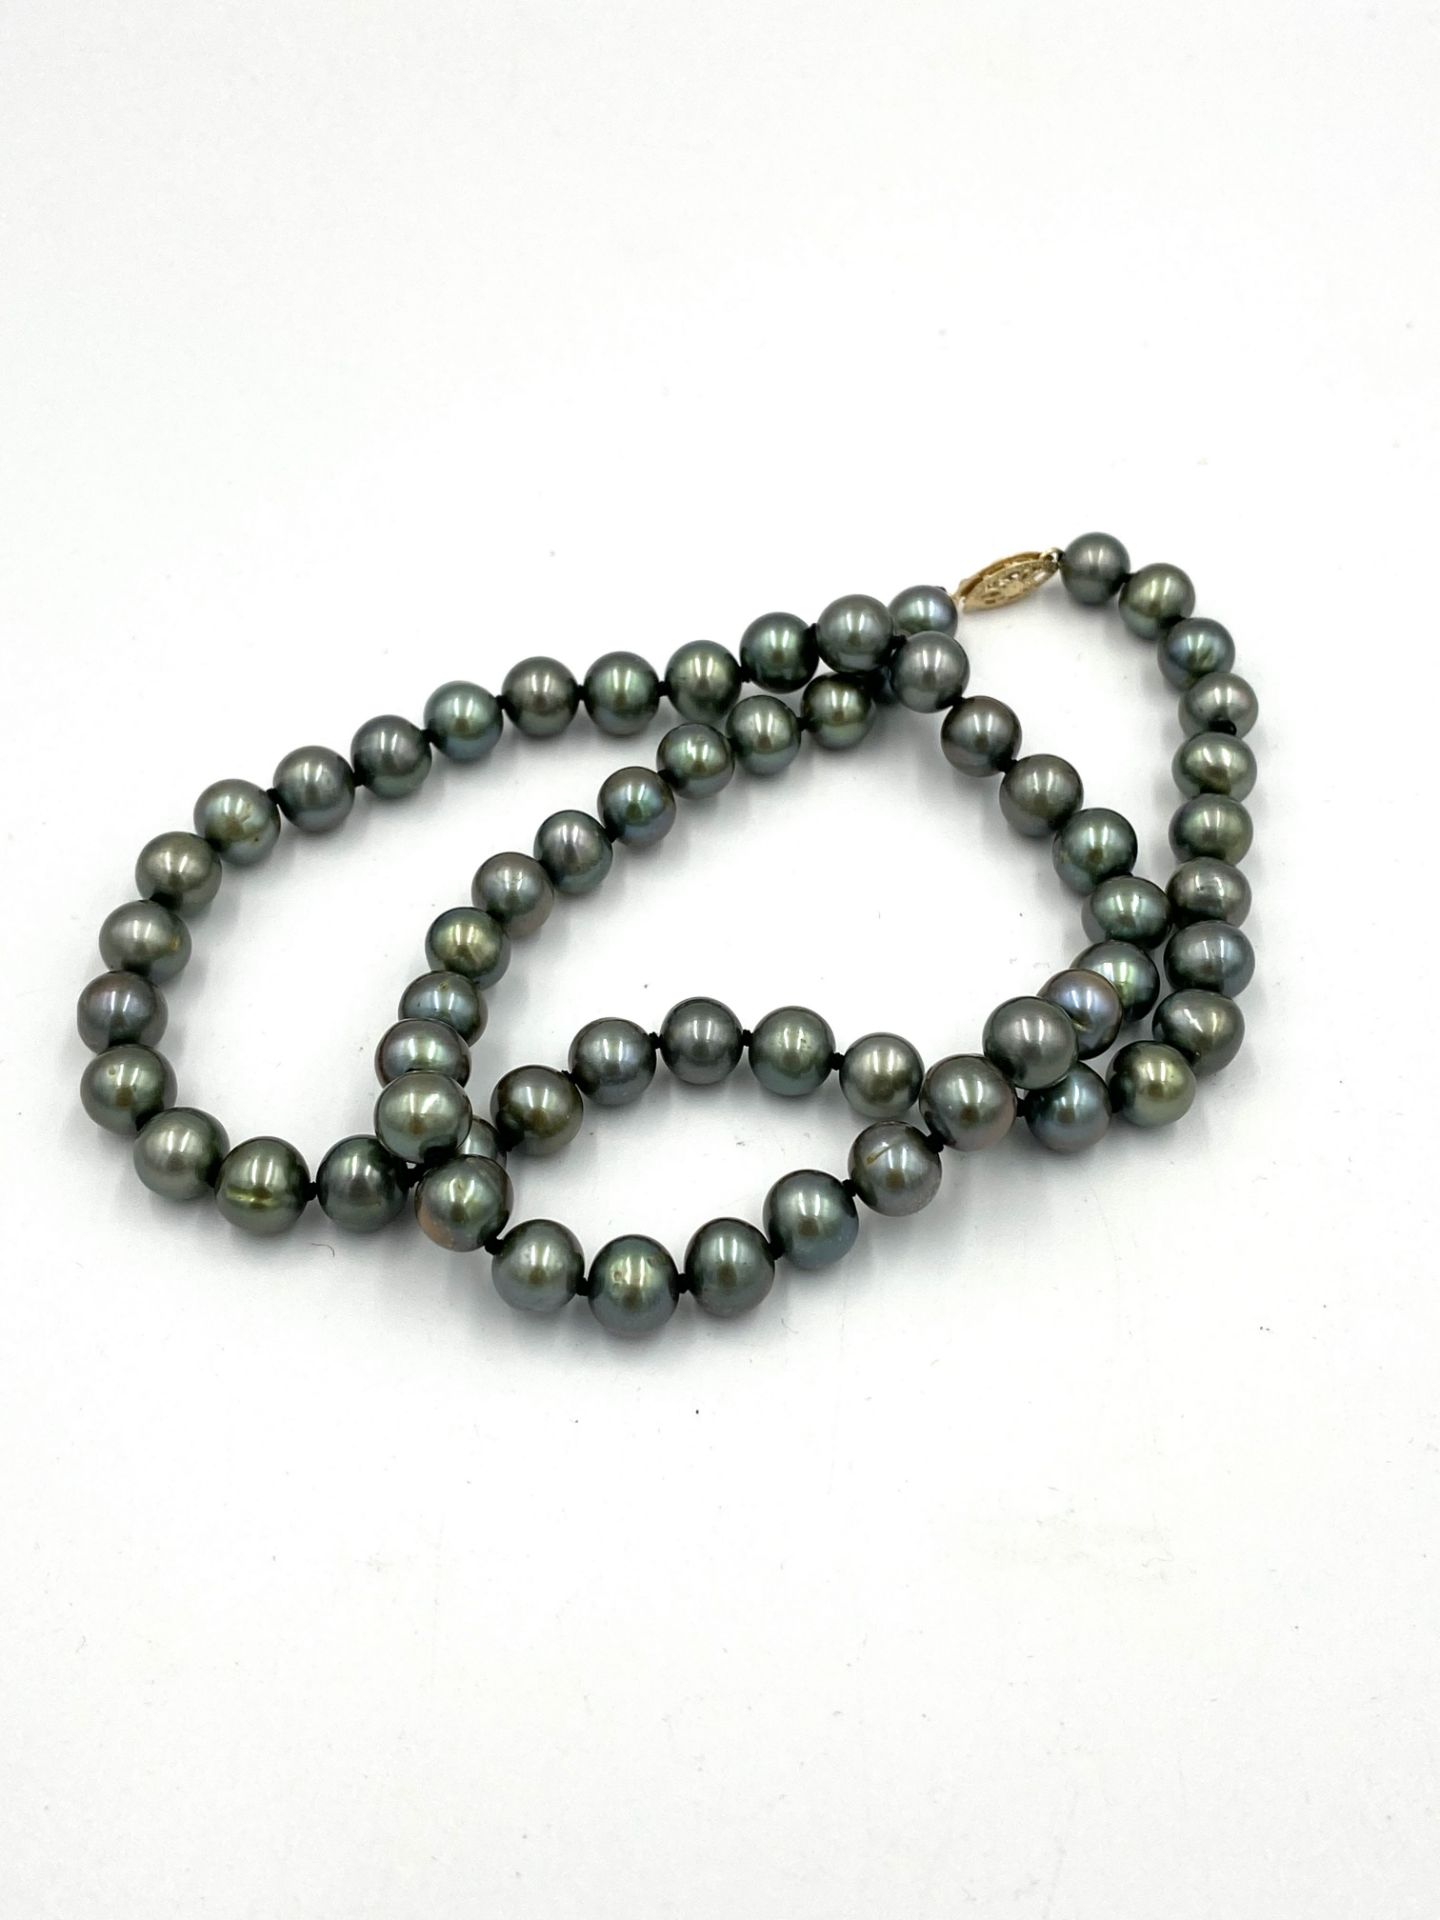 Green pearl necklace with 10ct gold clasp